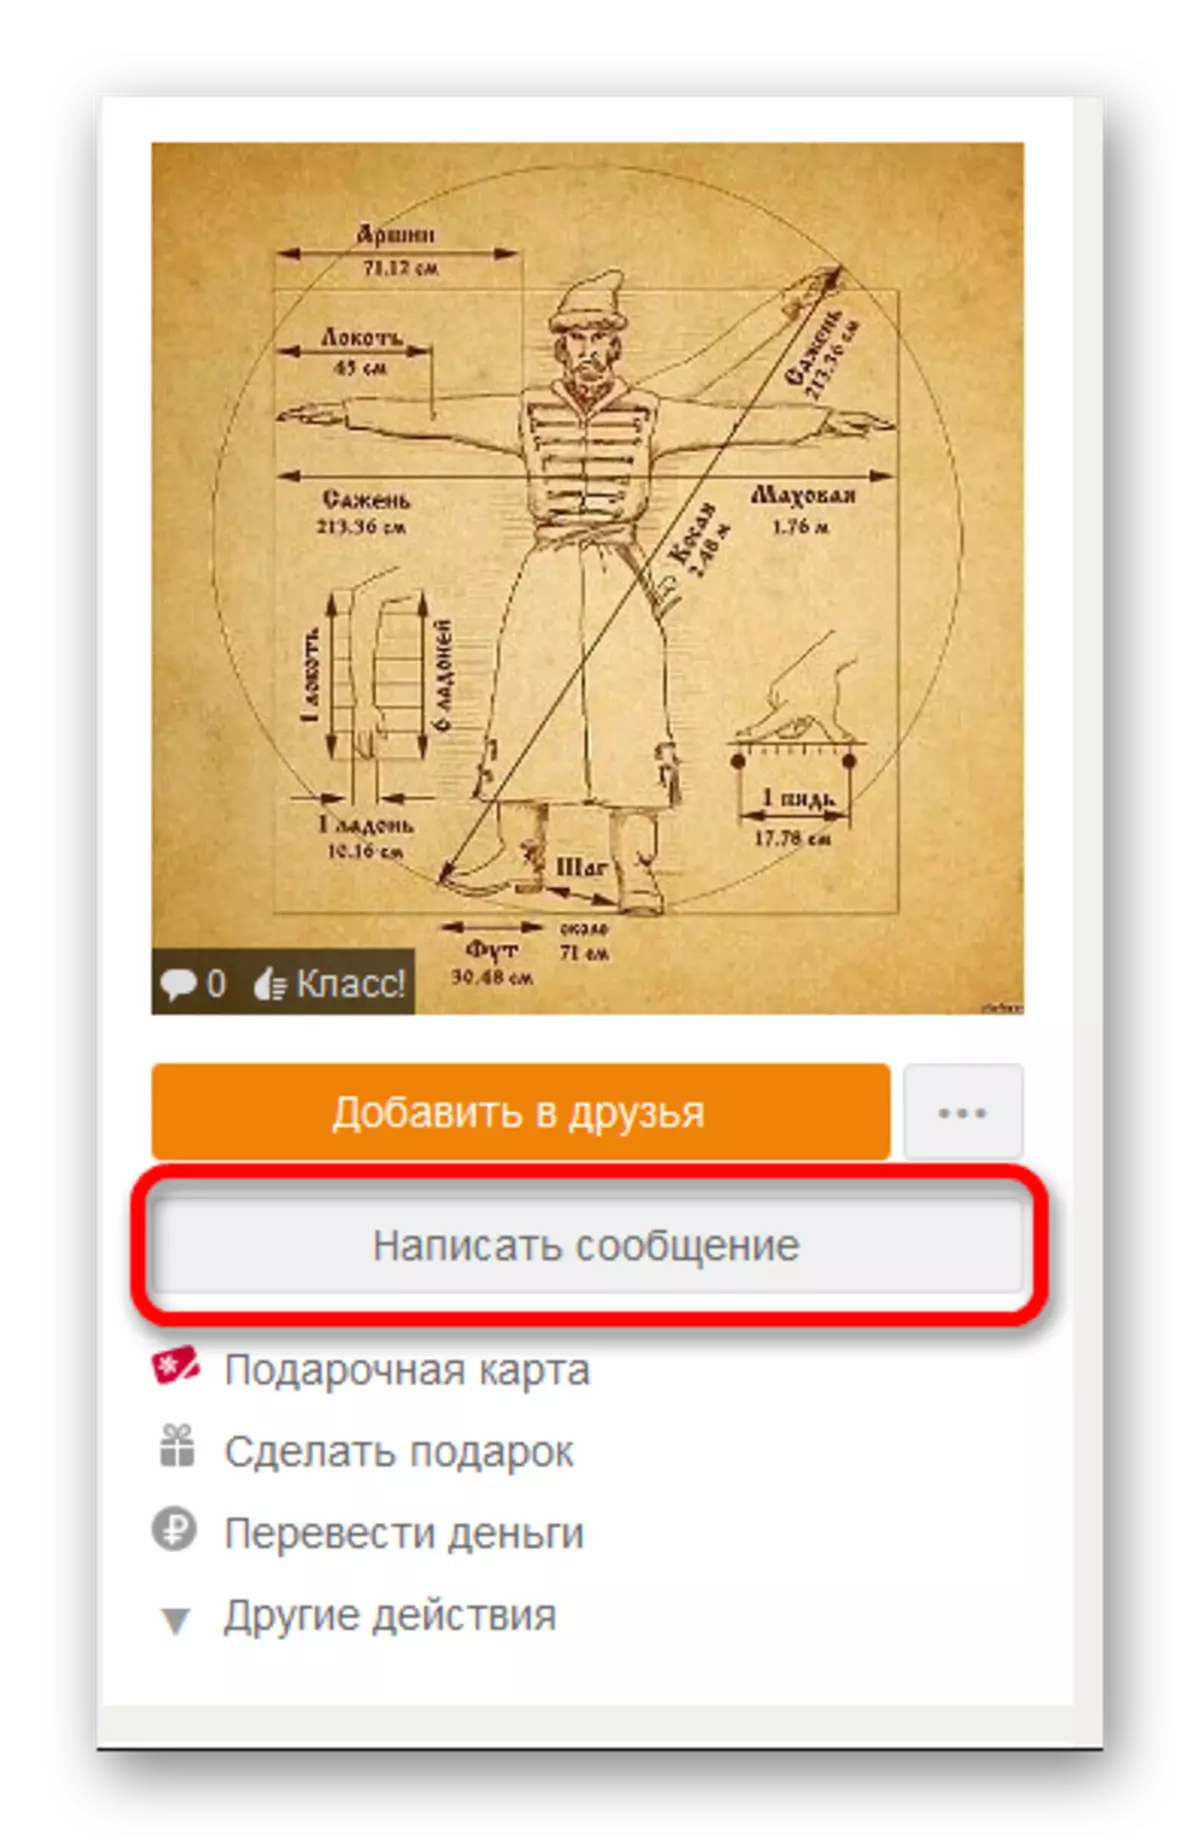 Moving messages to the user in Odnoklassniki